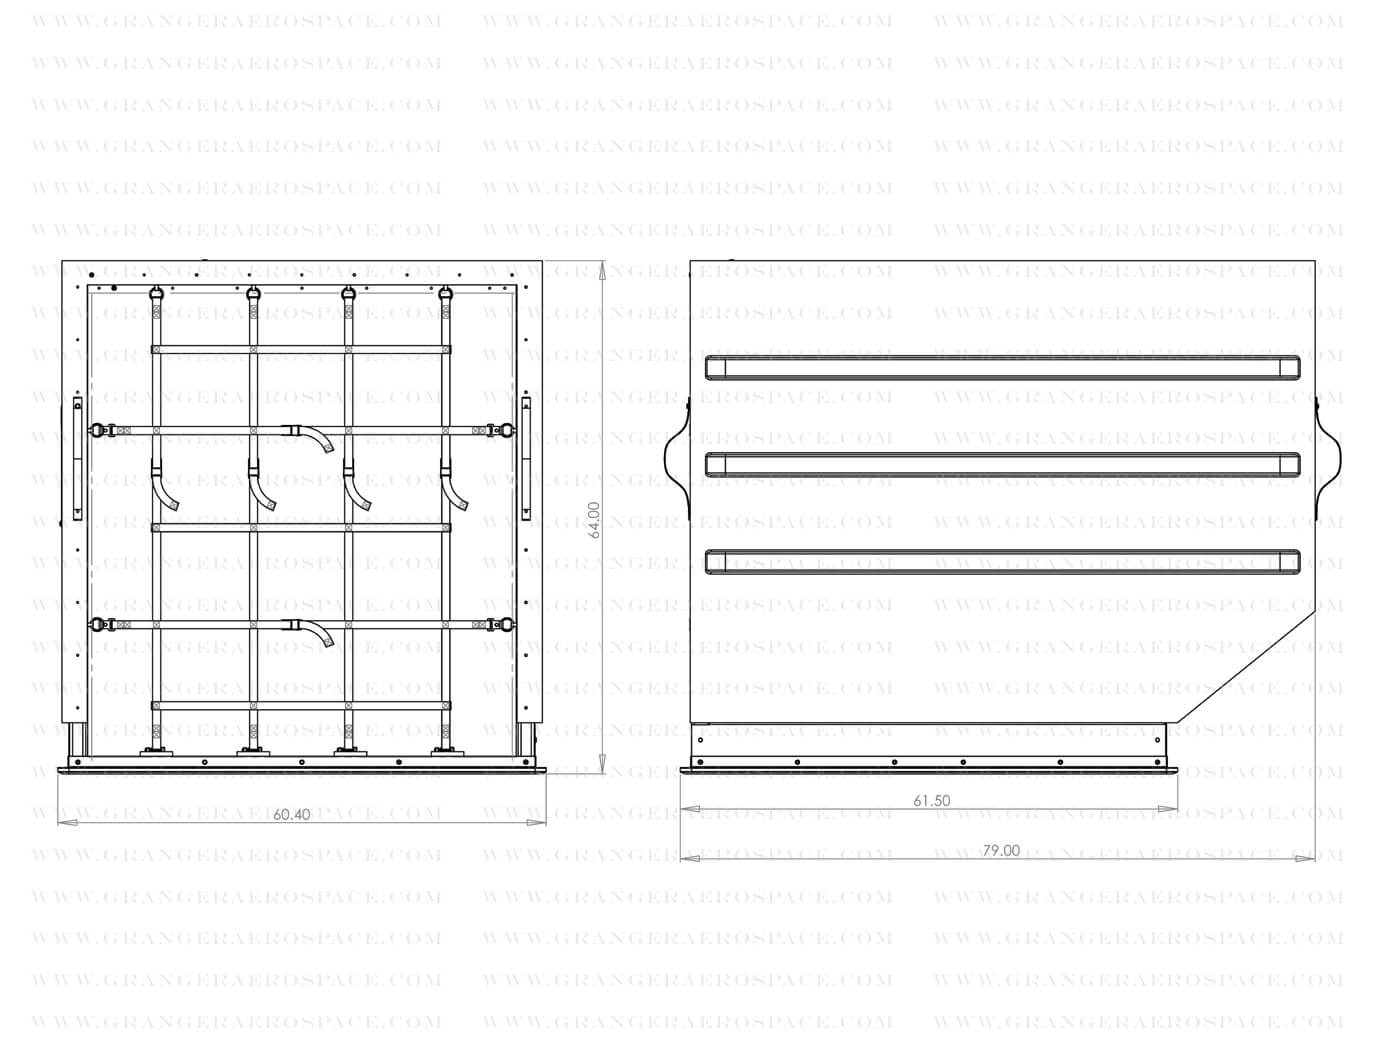 LD 3 Dimensions, LD 3 Air Cargo Container Dimensions, AKE dimensions